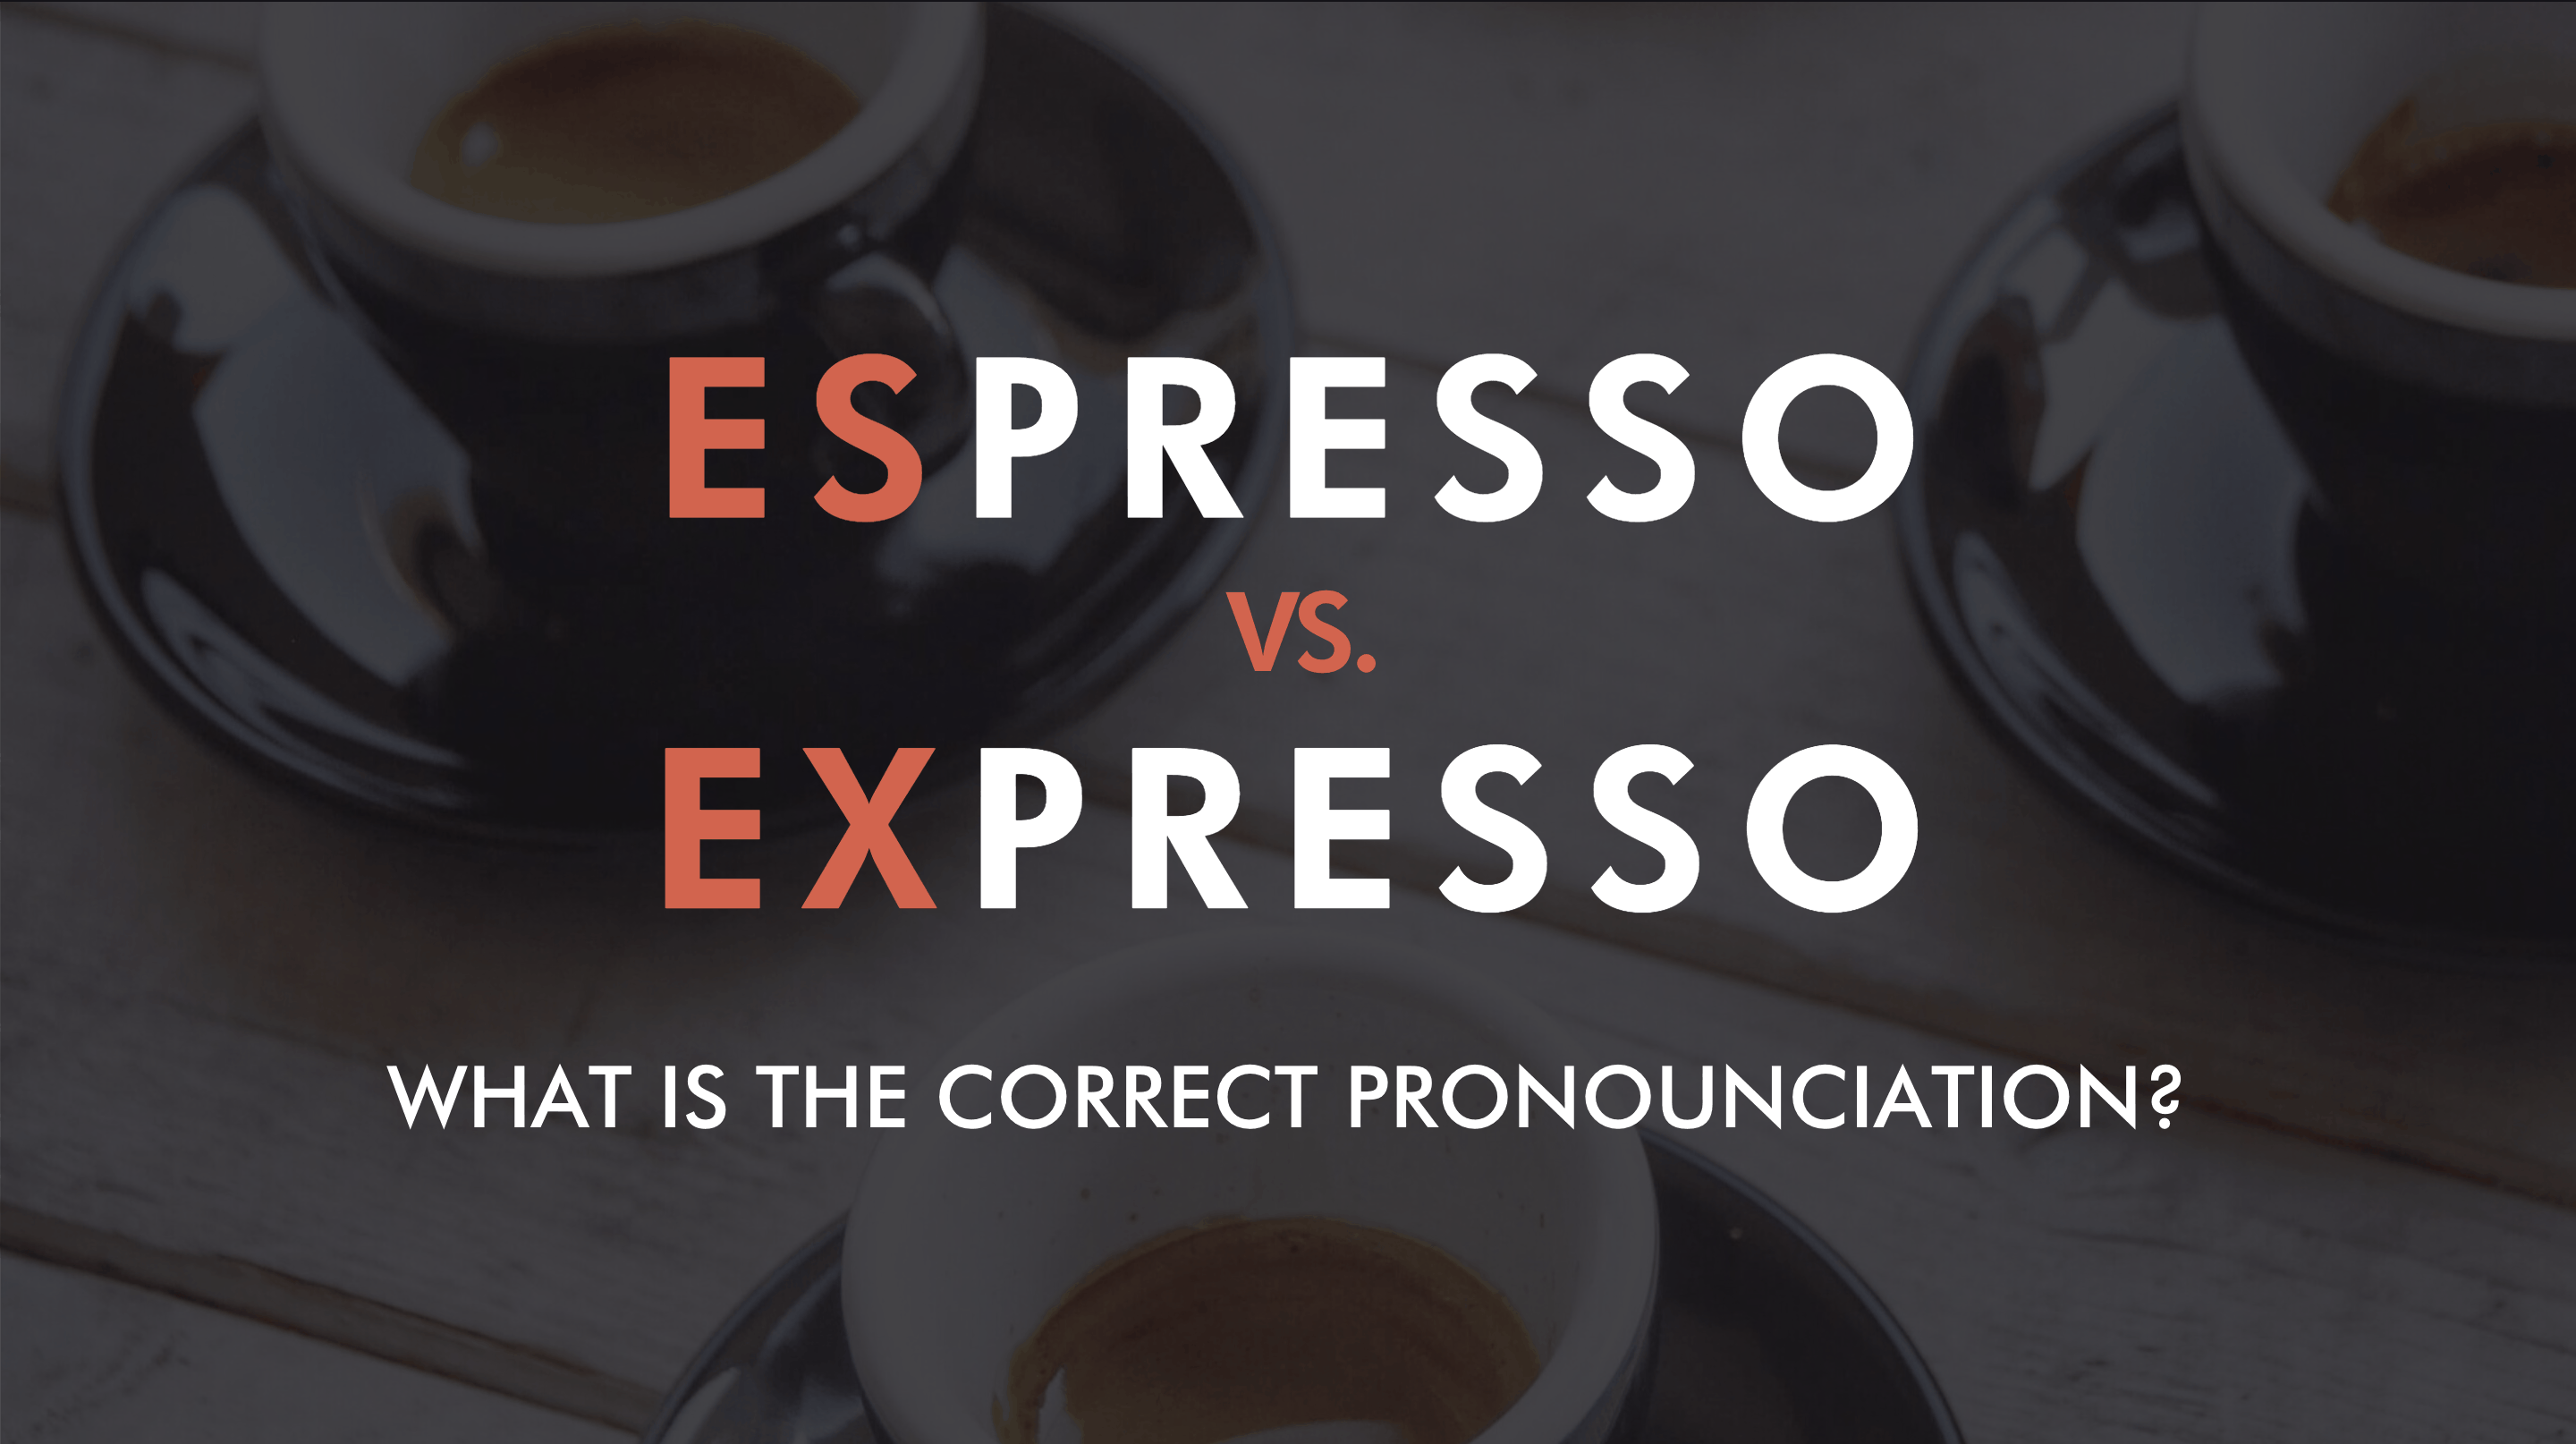 blog title image with espresso shots in background on white table with black overlay and text Espresso vs Expresso what is the correct pronounciation?